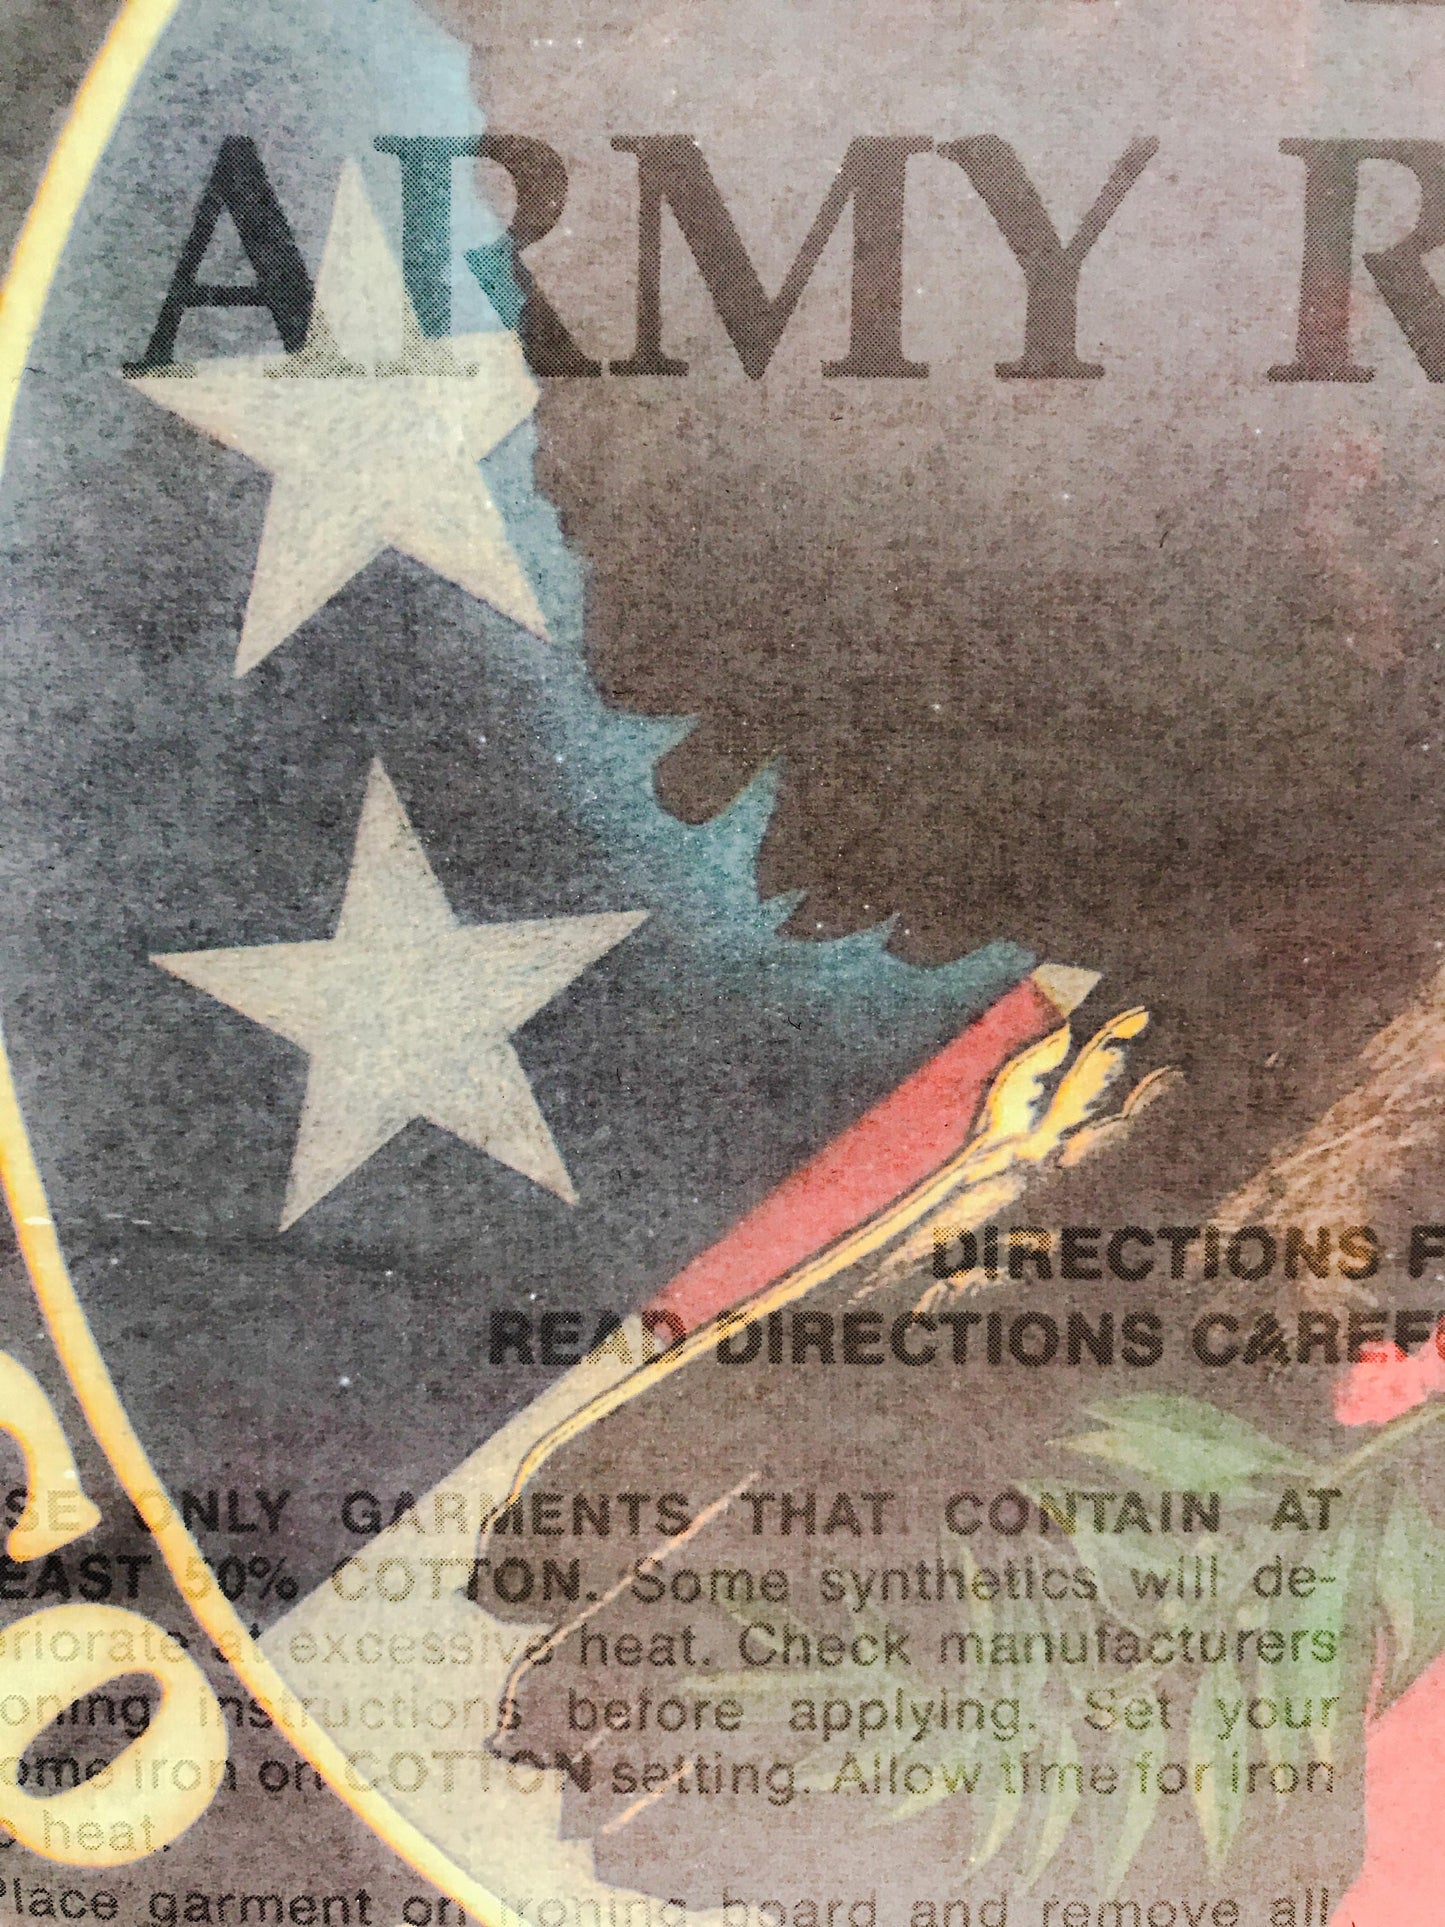 Go Army Reserve Vintage Iron On Heat Transfer